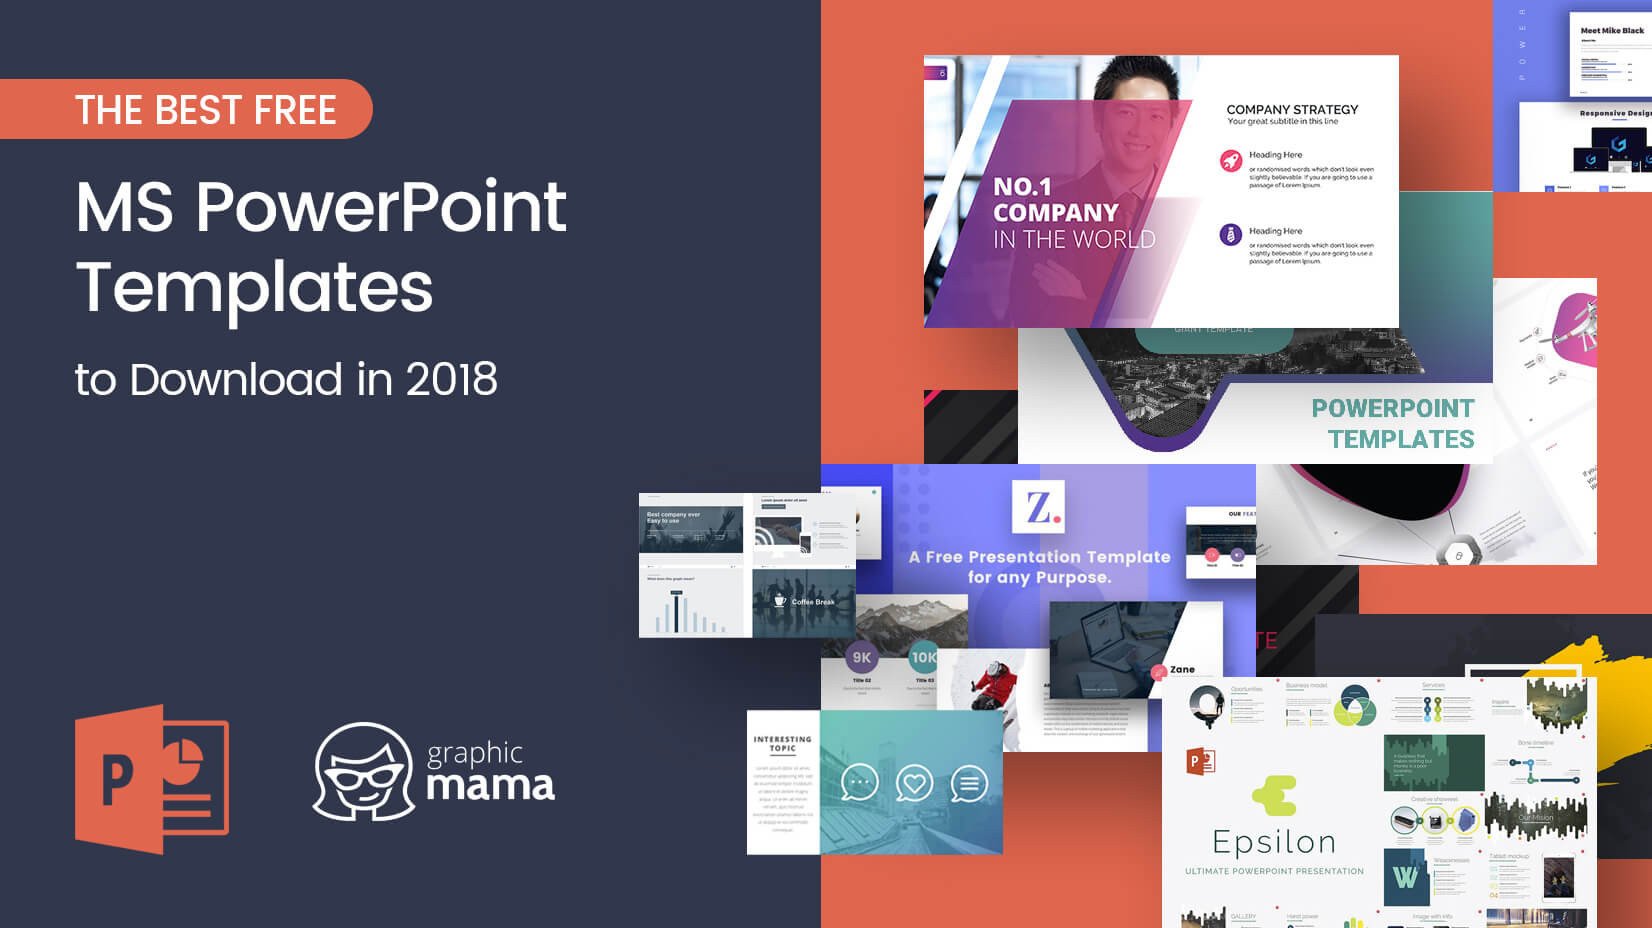 The Best Free PowerPoint Templates to Download in 2018